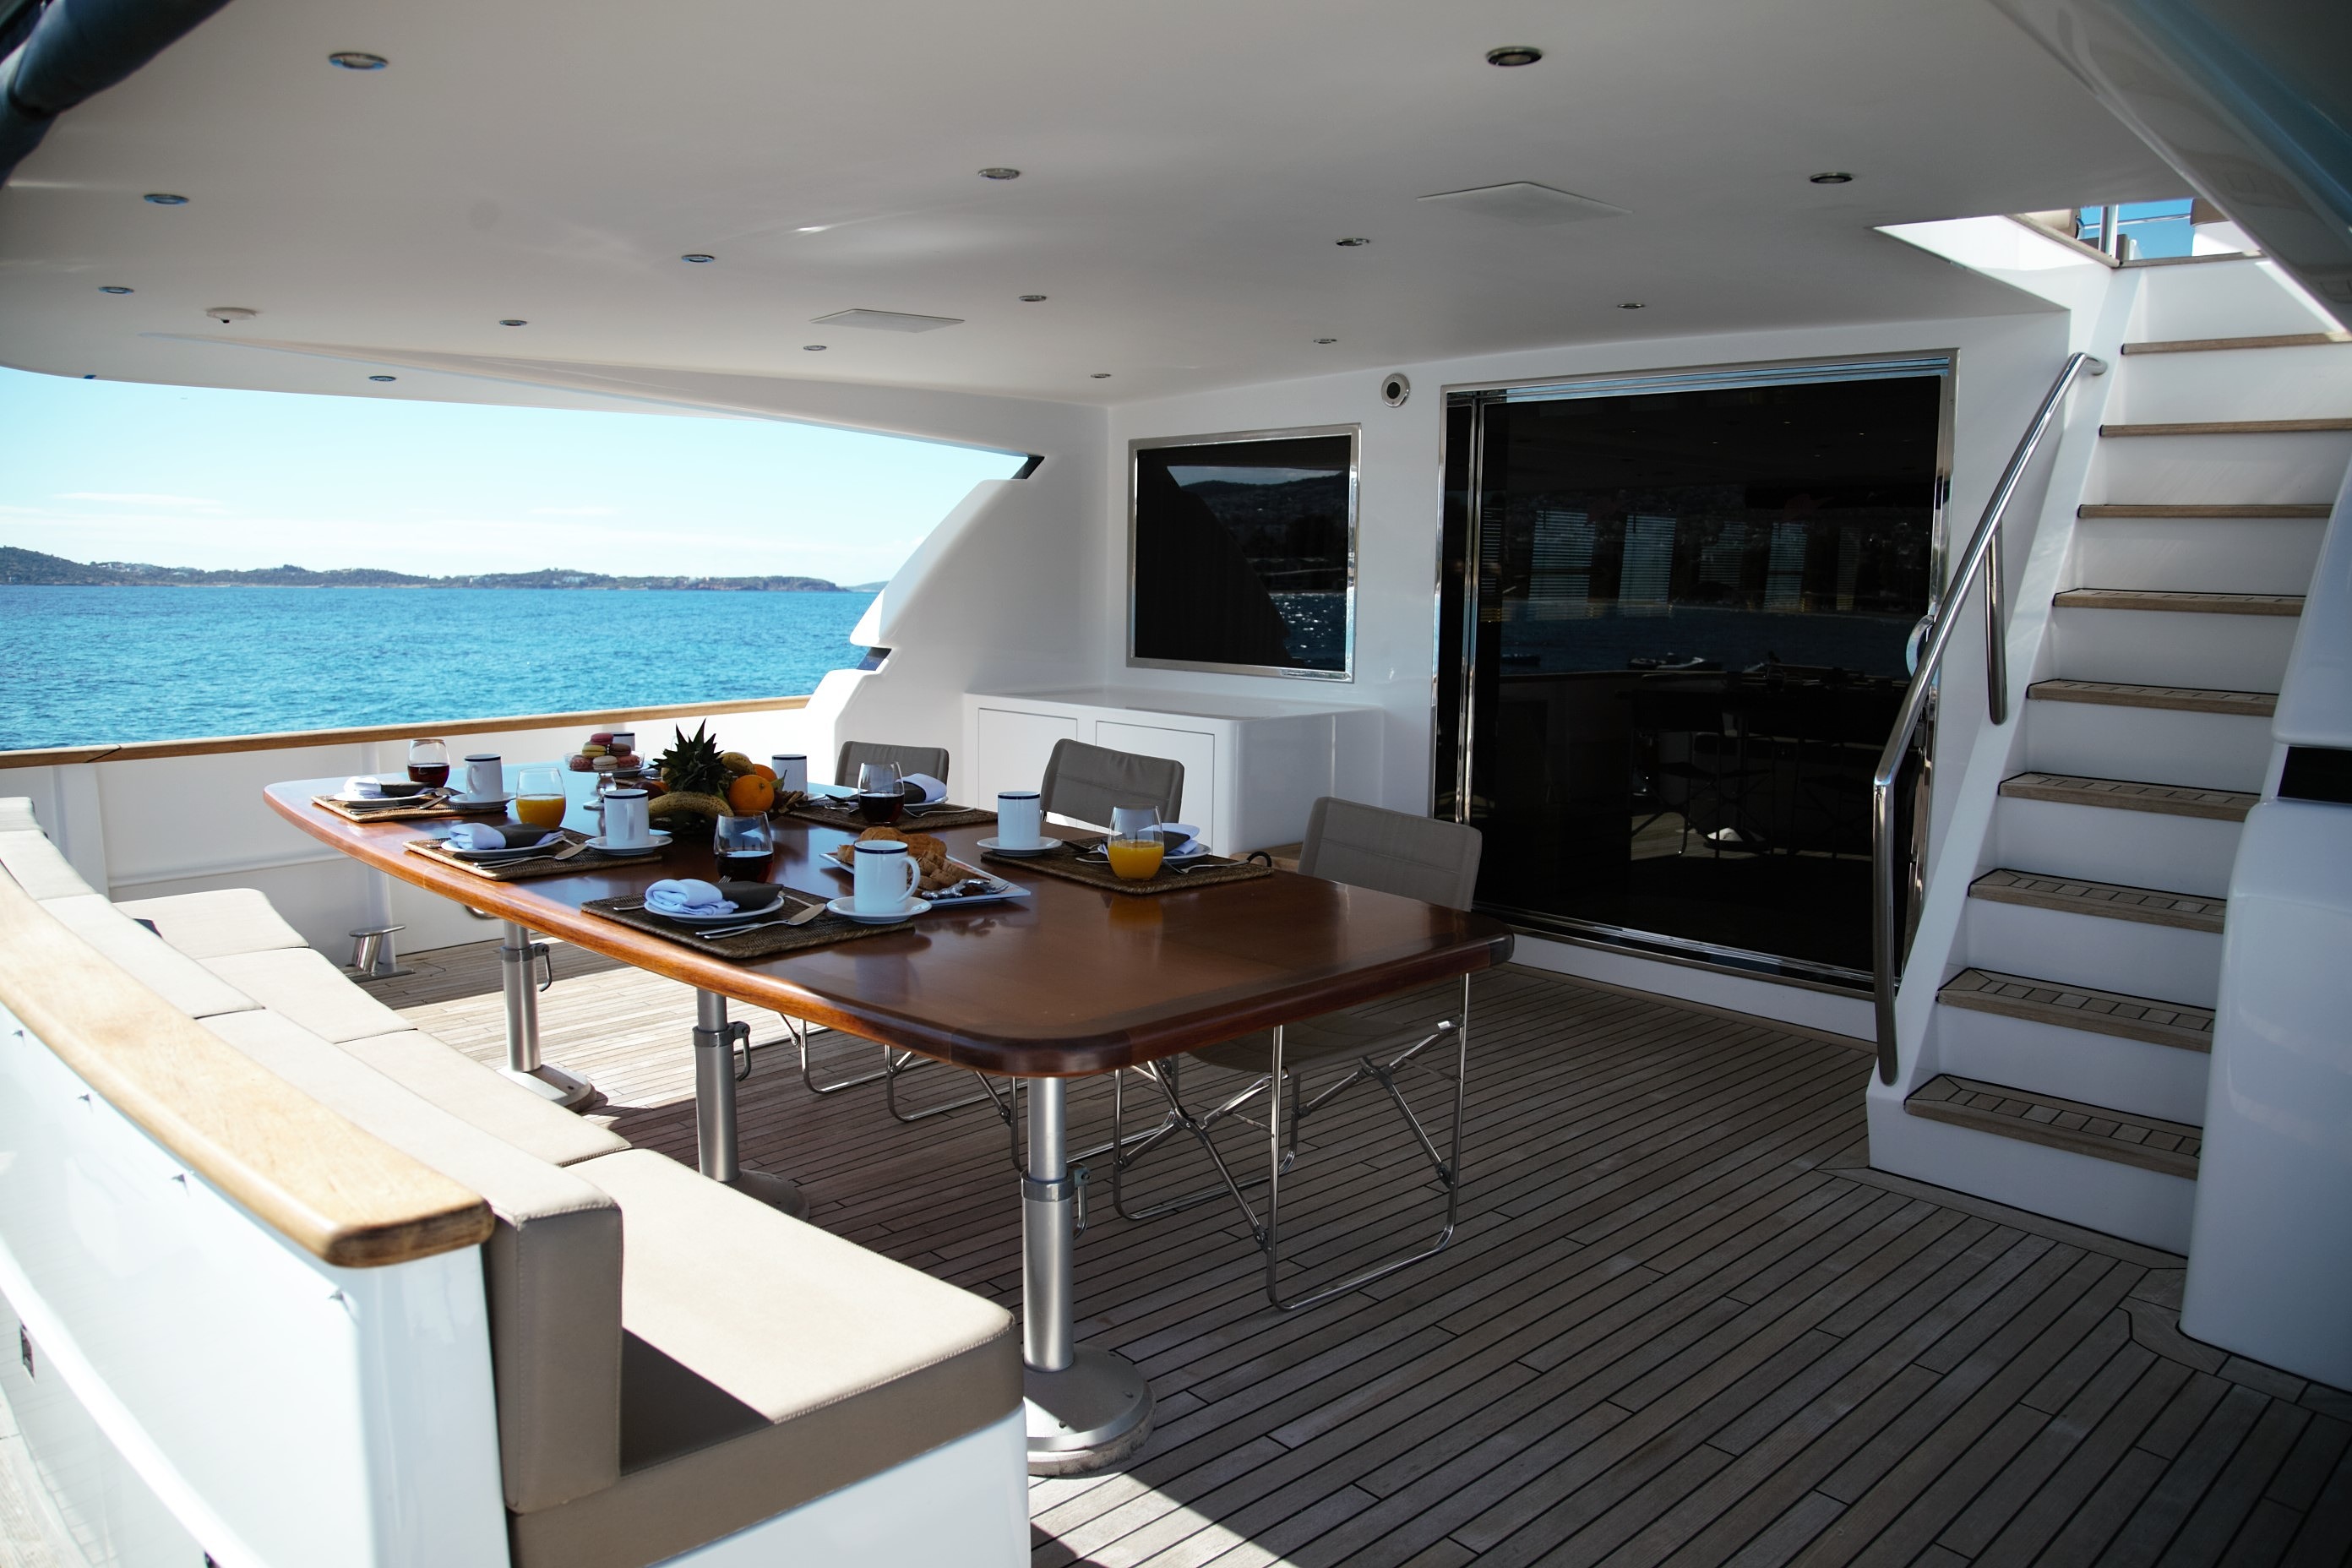  yacht charter luxury yachts sailing vacations boats for sale contact